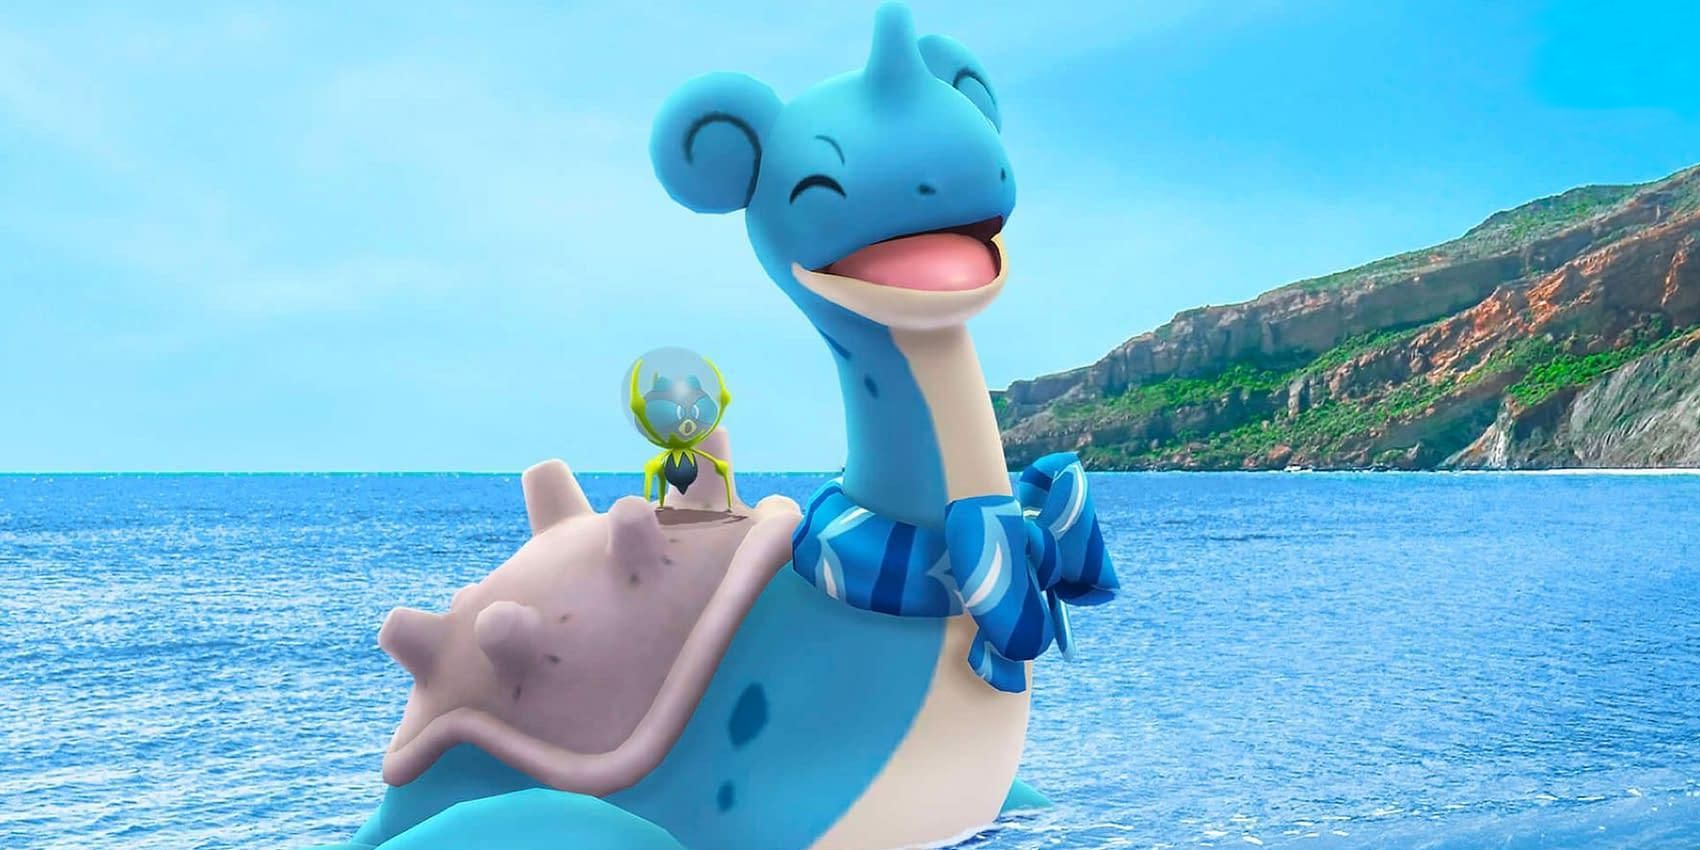 How to Catch Scarf Lapras During Water Festival in Pokémon GO